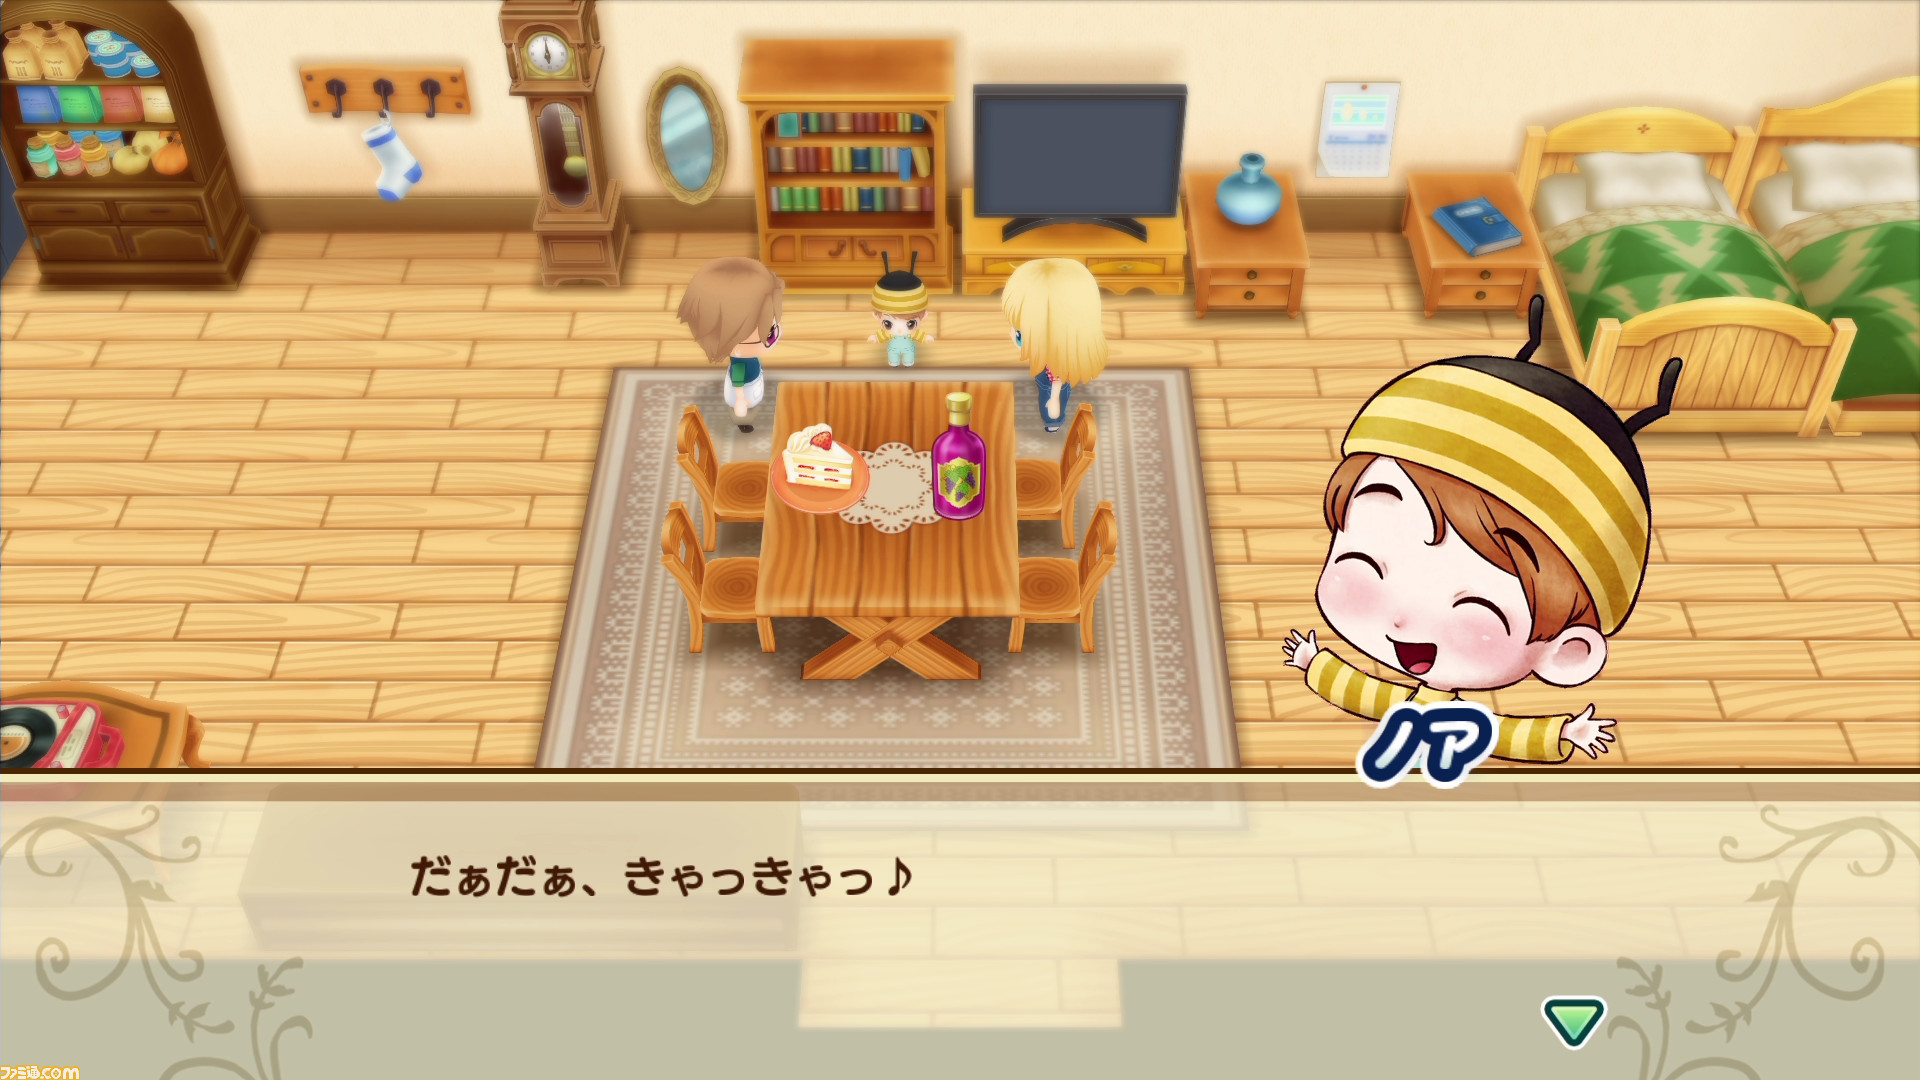 harvest moon: friends of mineral town remake